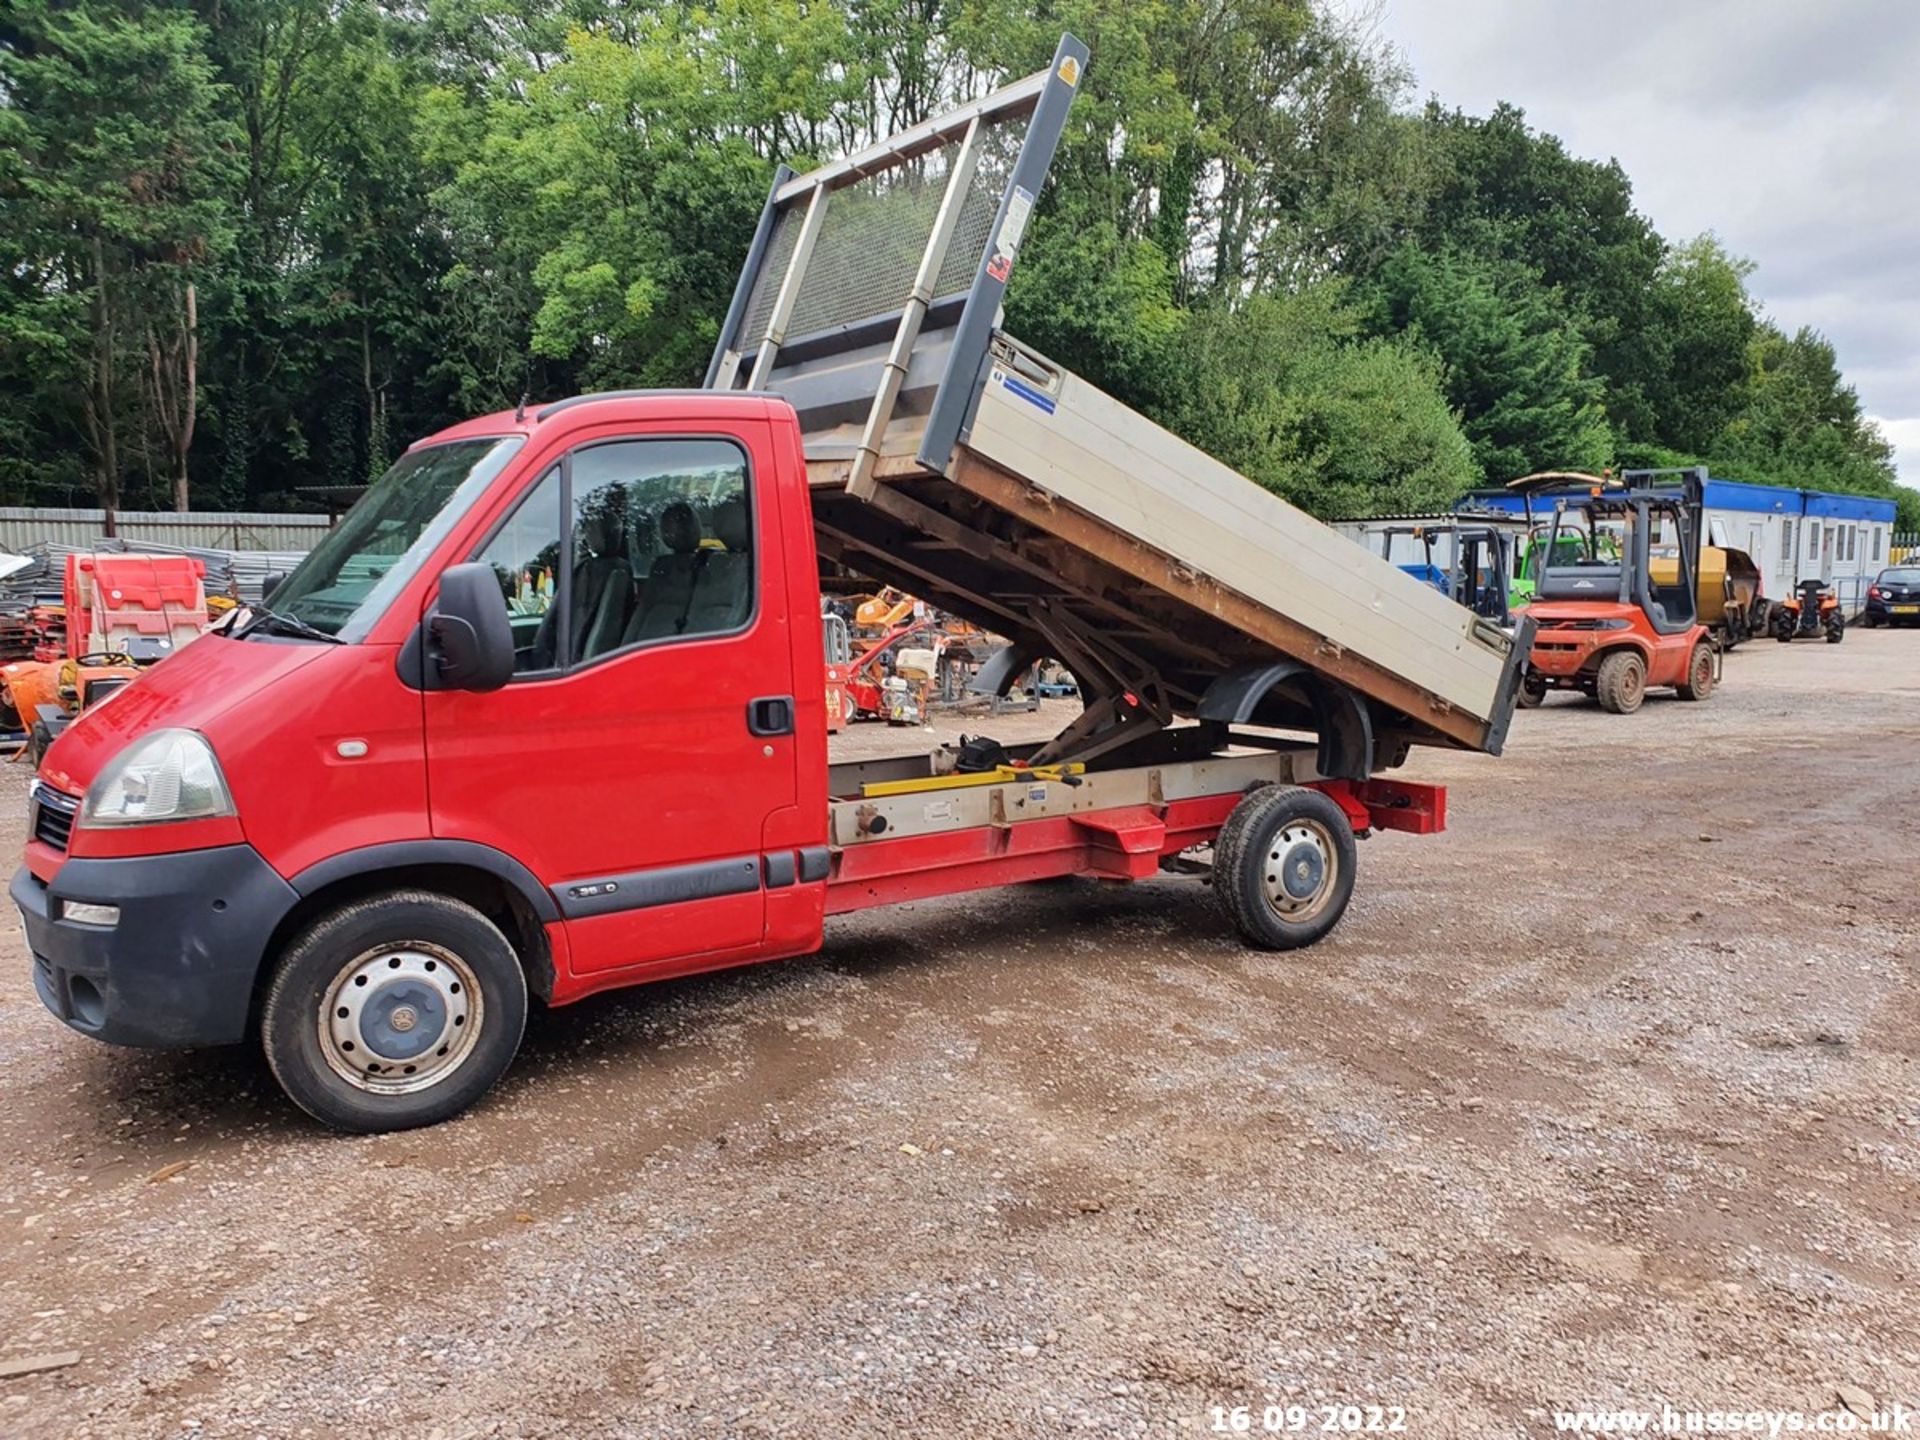 11/11 VAUXHALL MOVANO 3500 CDTI MWB - 2464cc 2dr Tipper (Red, 52k) - Image 40 of 44